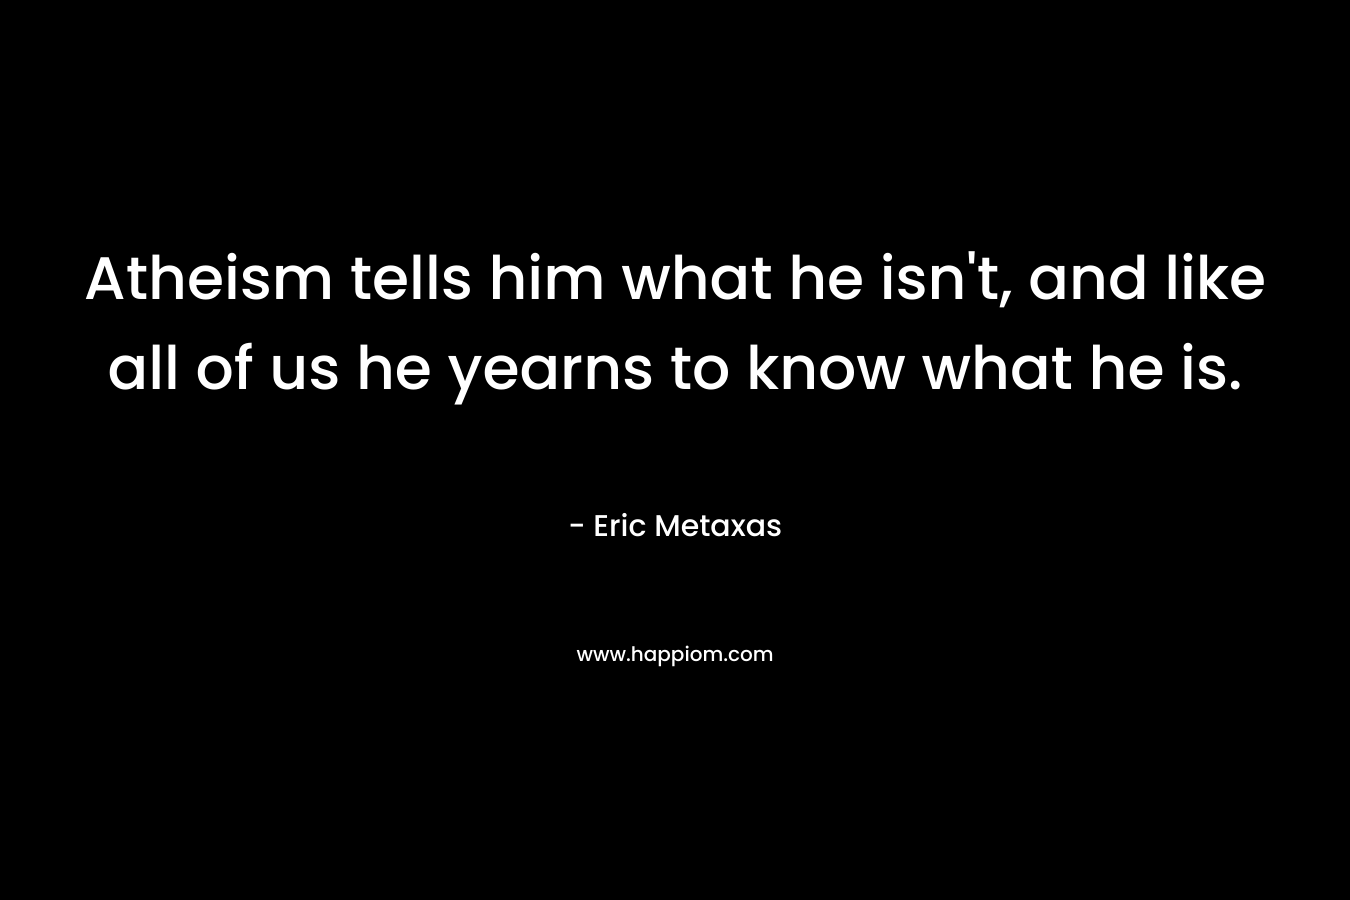 Atheism tells him what he isn't, and like all of us he yearns to know what he is.